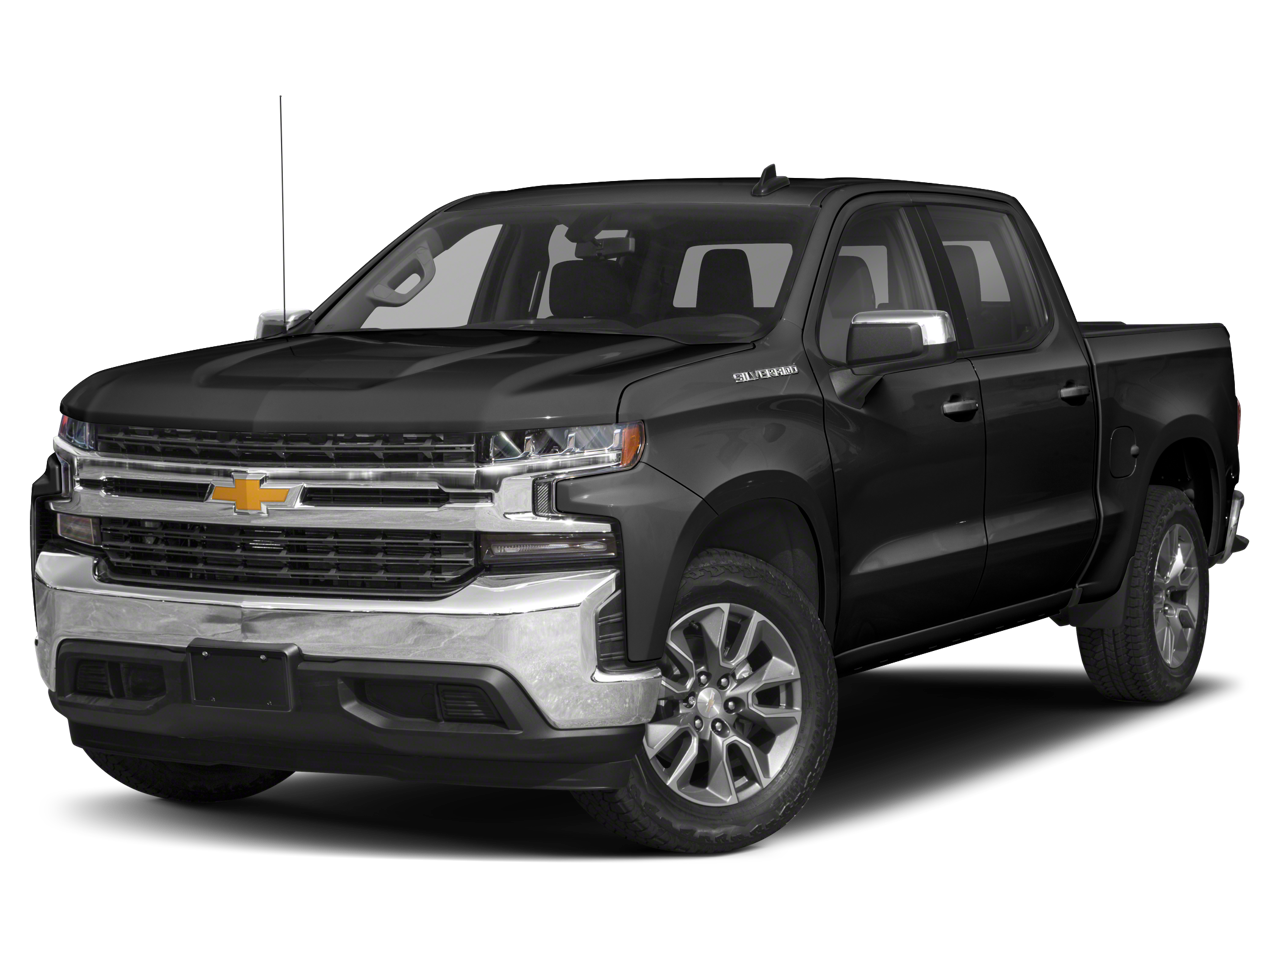 Used 2021 Chevrolet Silverado 1500 LT with VIN 1GCUYDED0MZ352123 for sale in Mankato, Minnesota